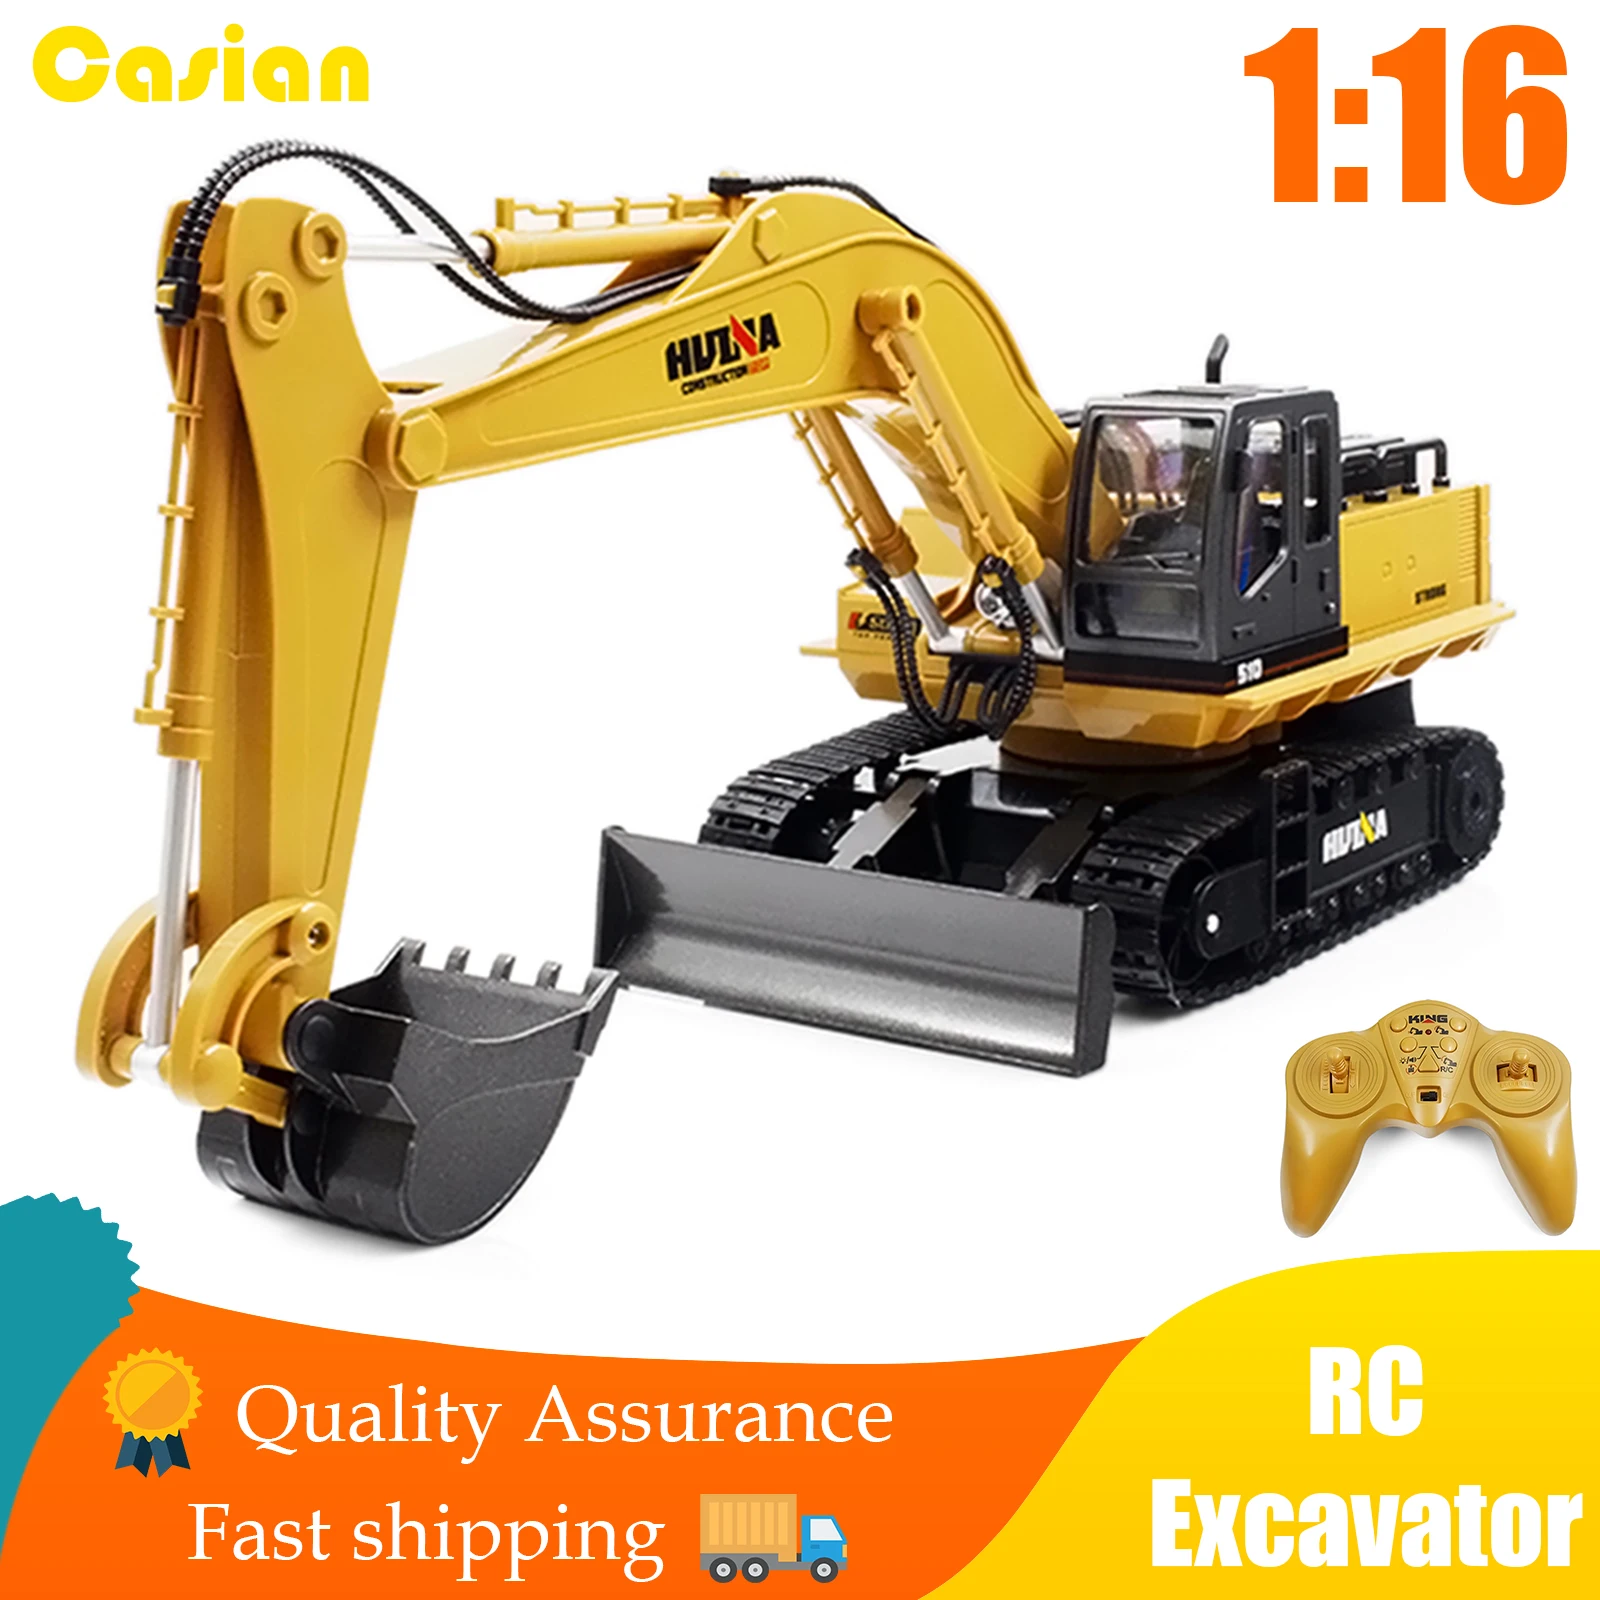 

HUINA 1/16 RC Car RC Excavator 2.4G Radio Controlled Truck Caterpillar Tractor Model Engineering Cars 11 Channel Toys For Boys